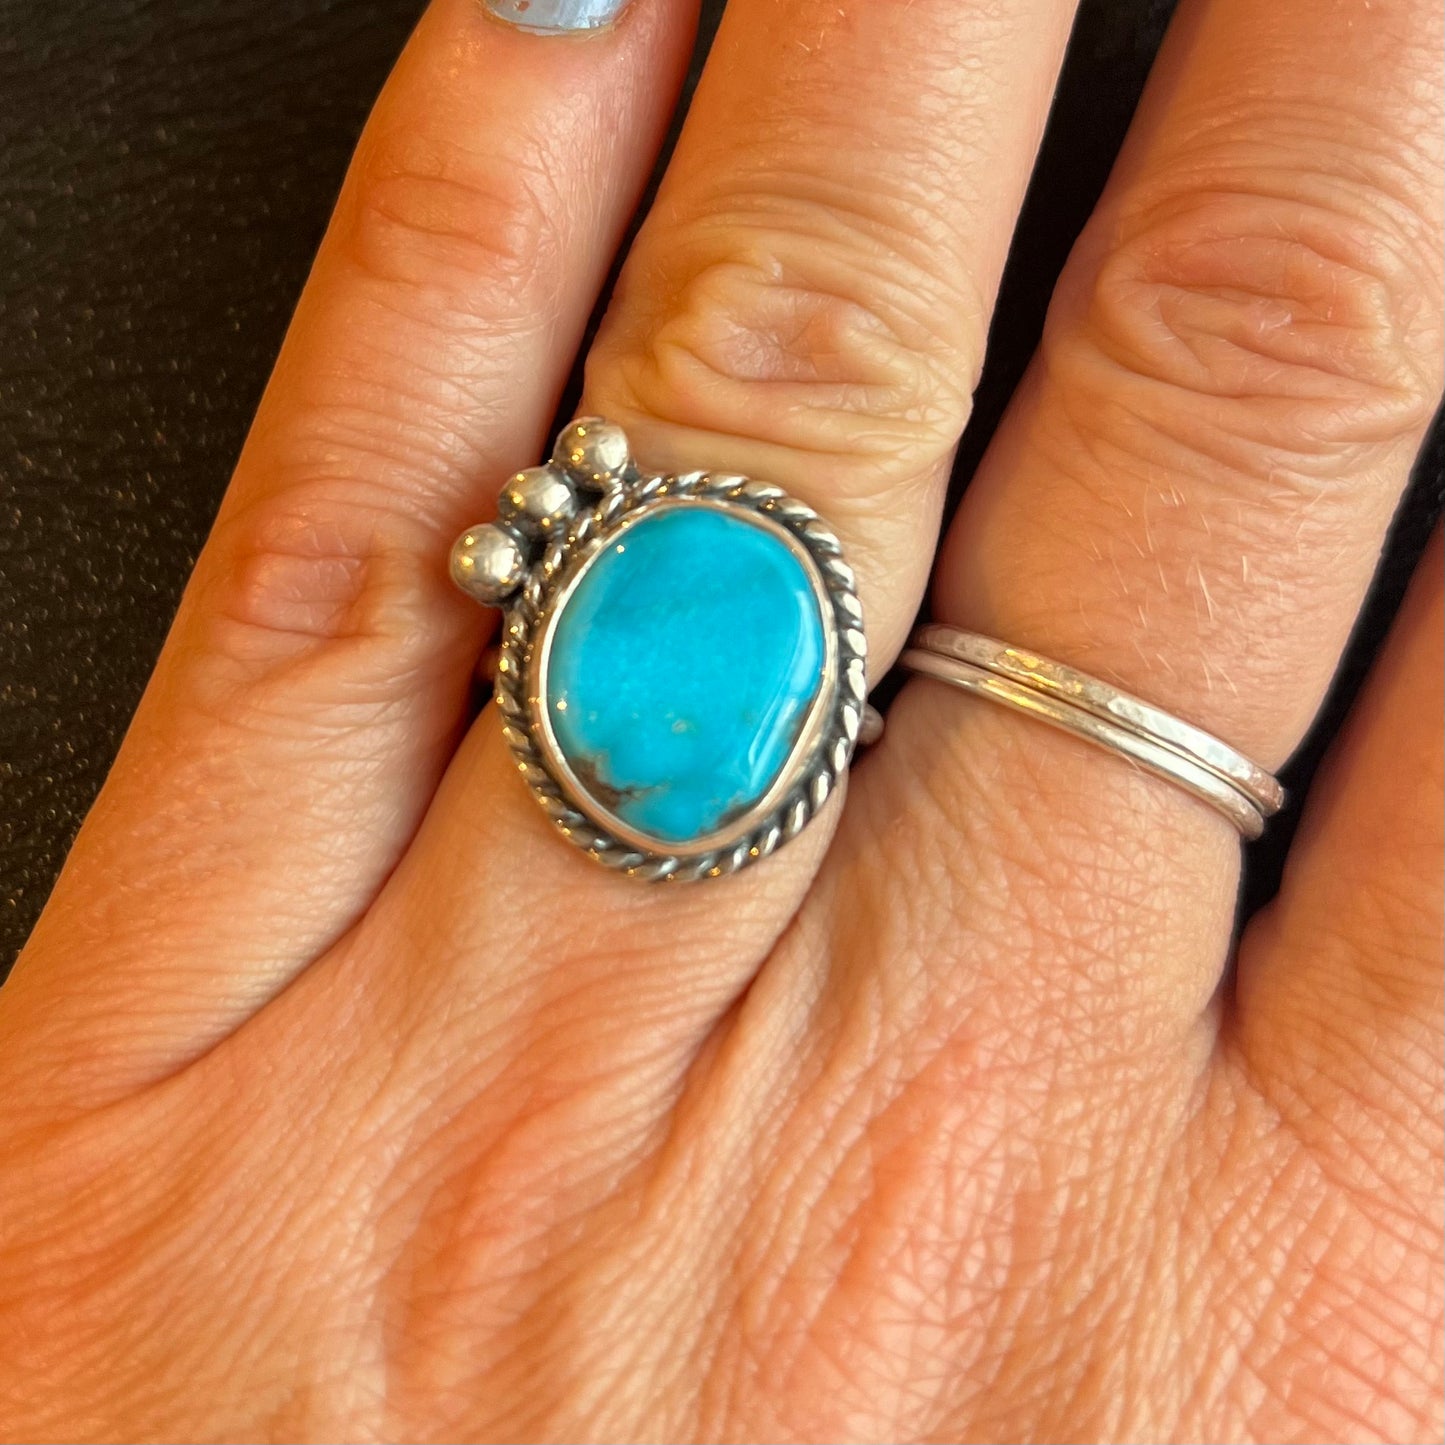 Cactus Blossom American Turquoise Ring